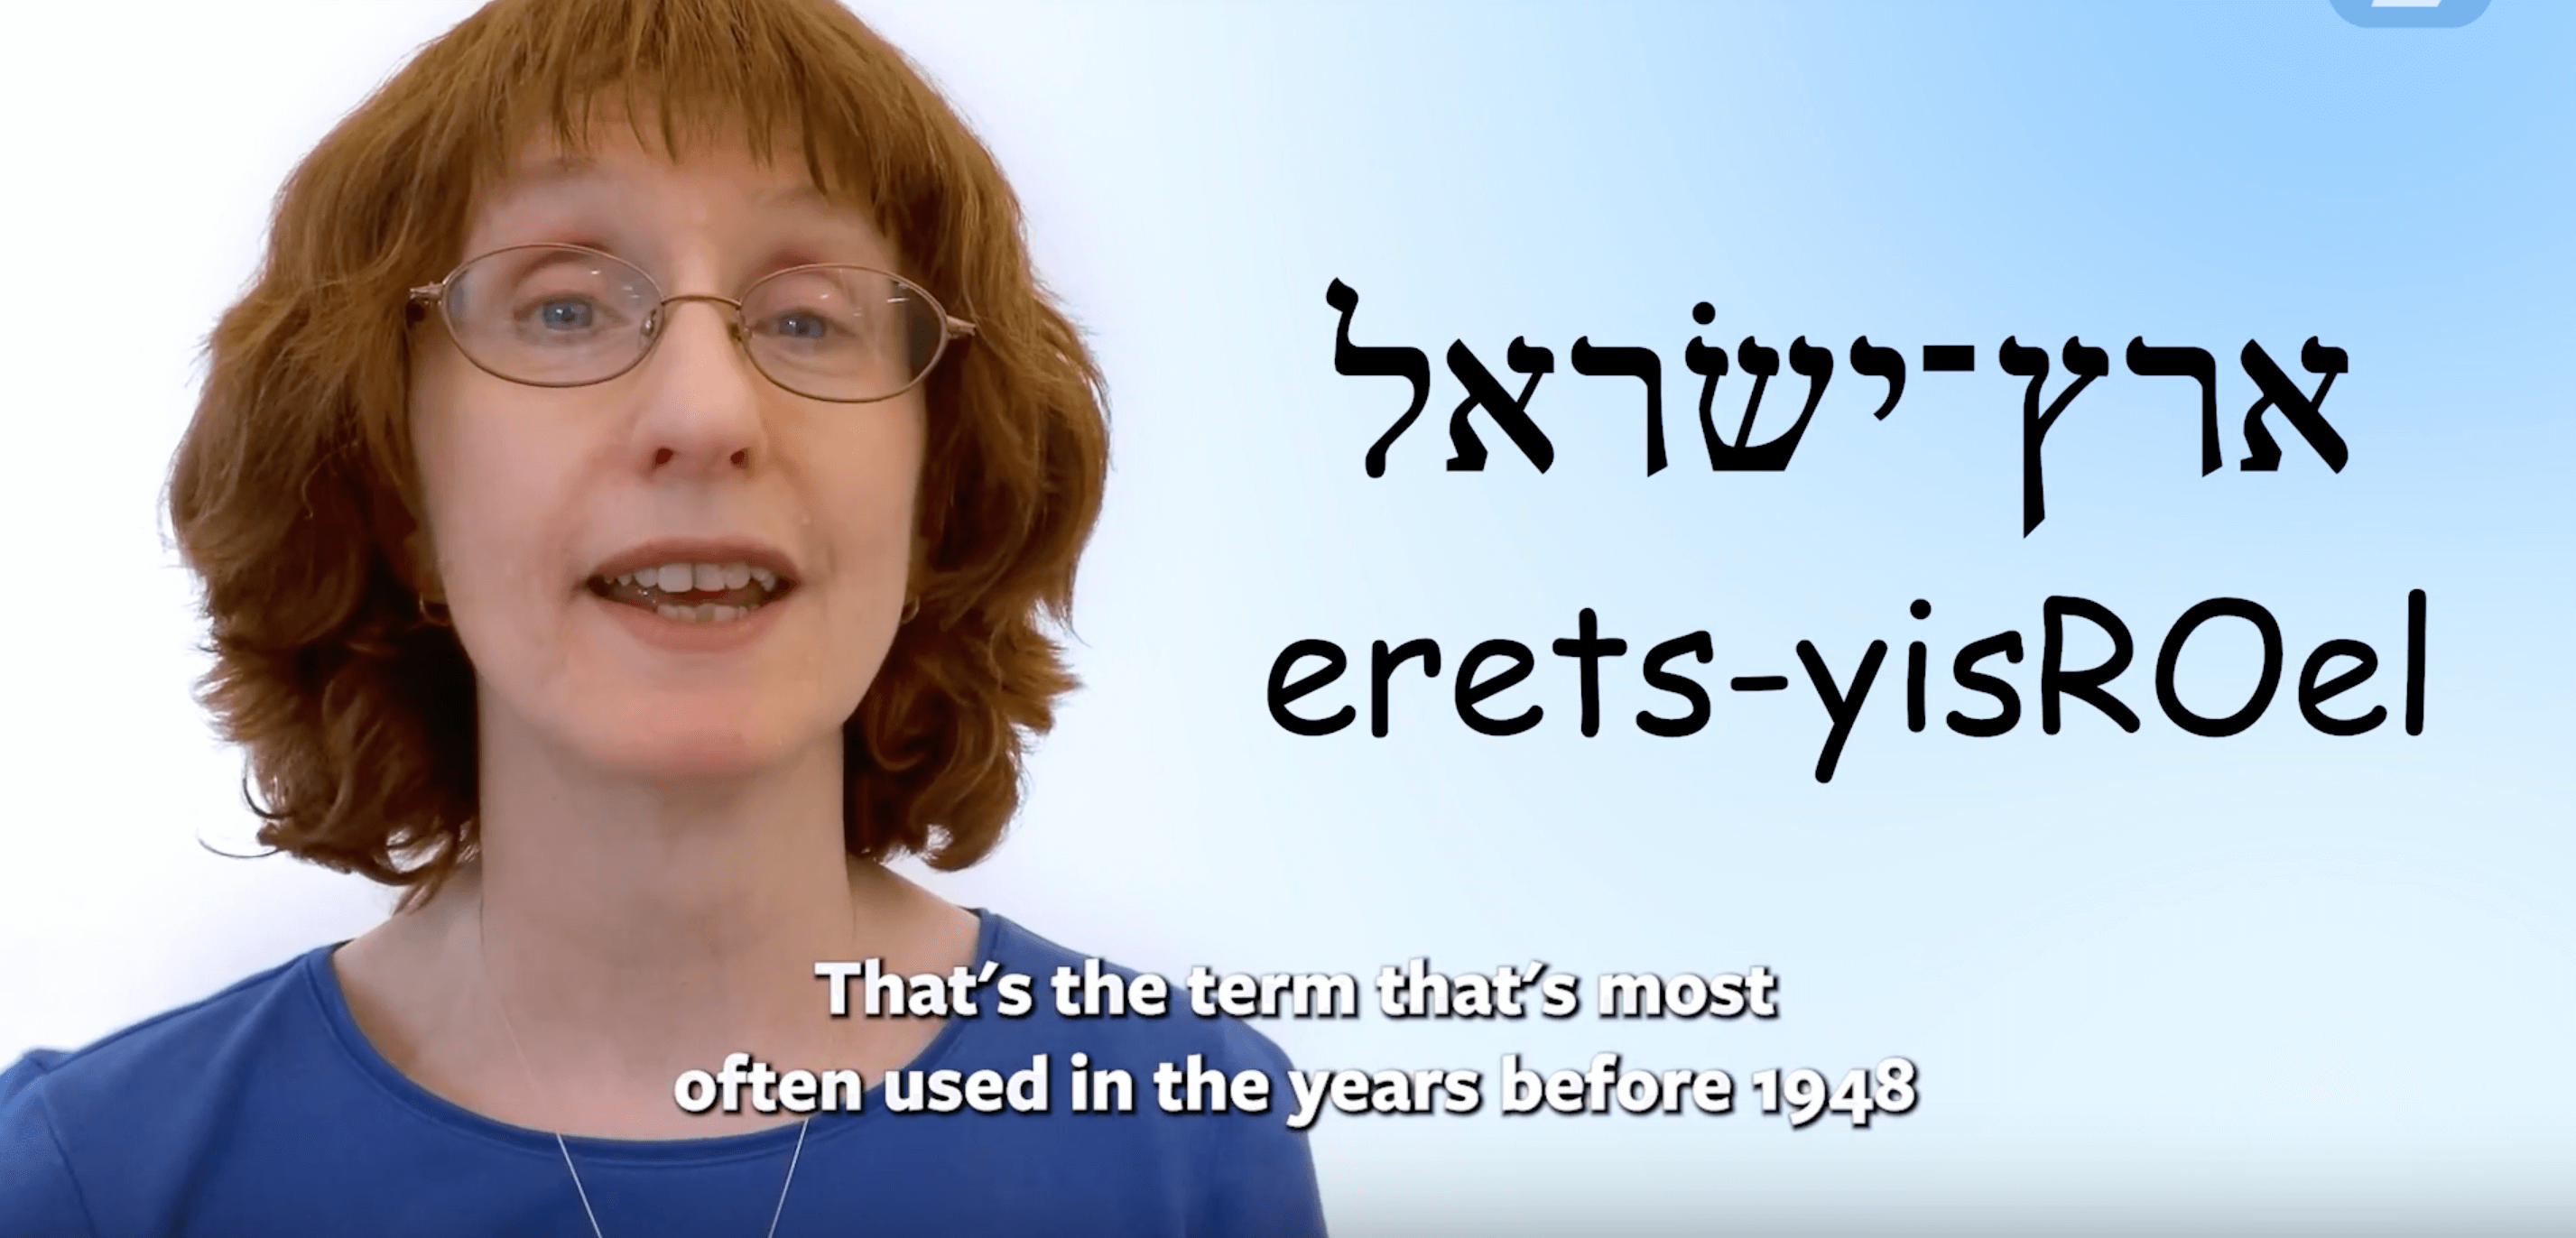 VIDEO Yiddish Word of the Day Israel The Forward